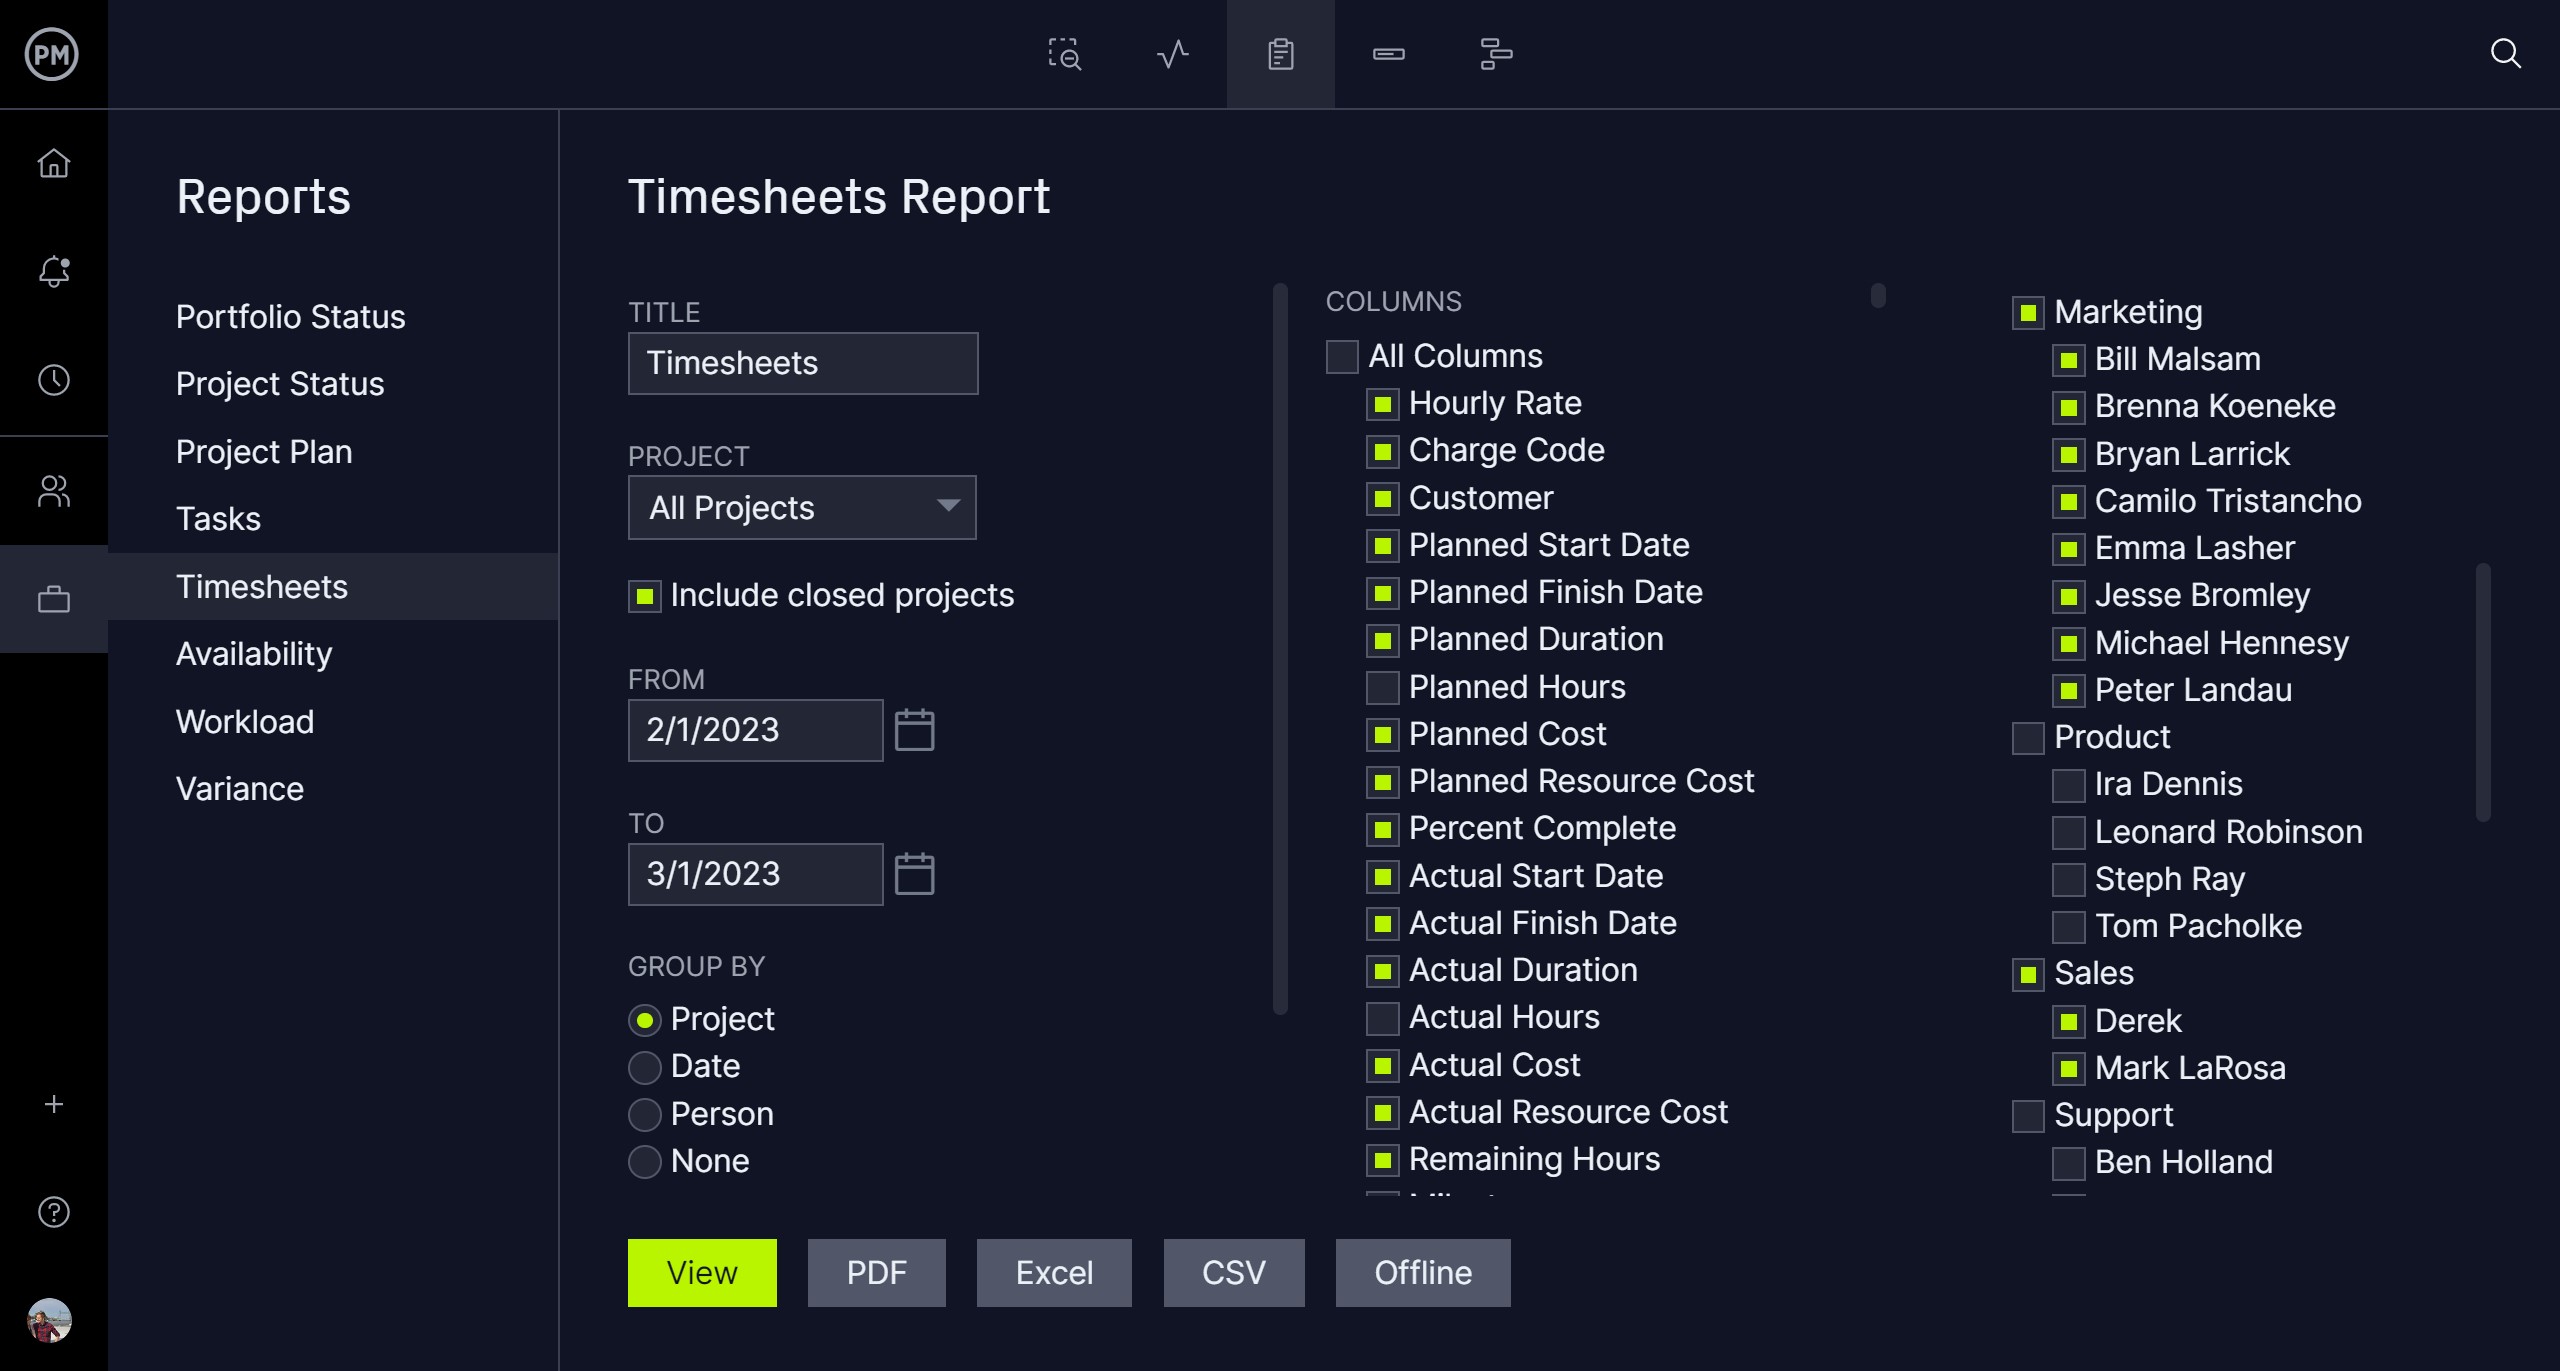 ProjectManager's timesheet report filter